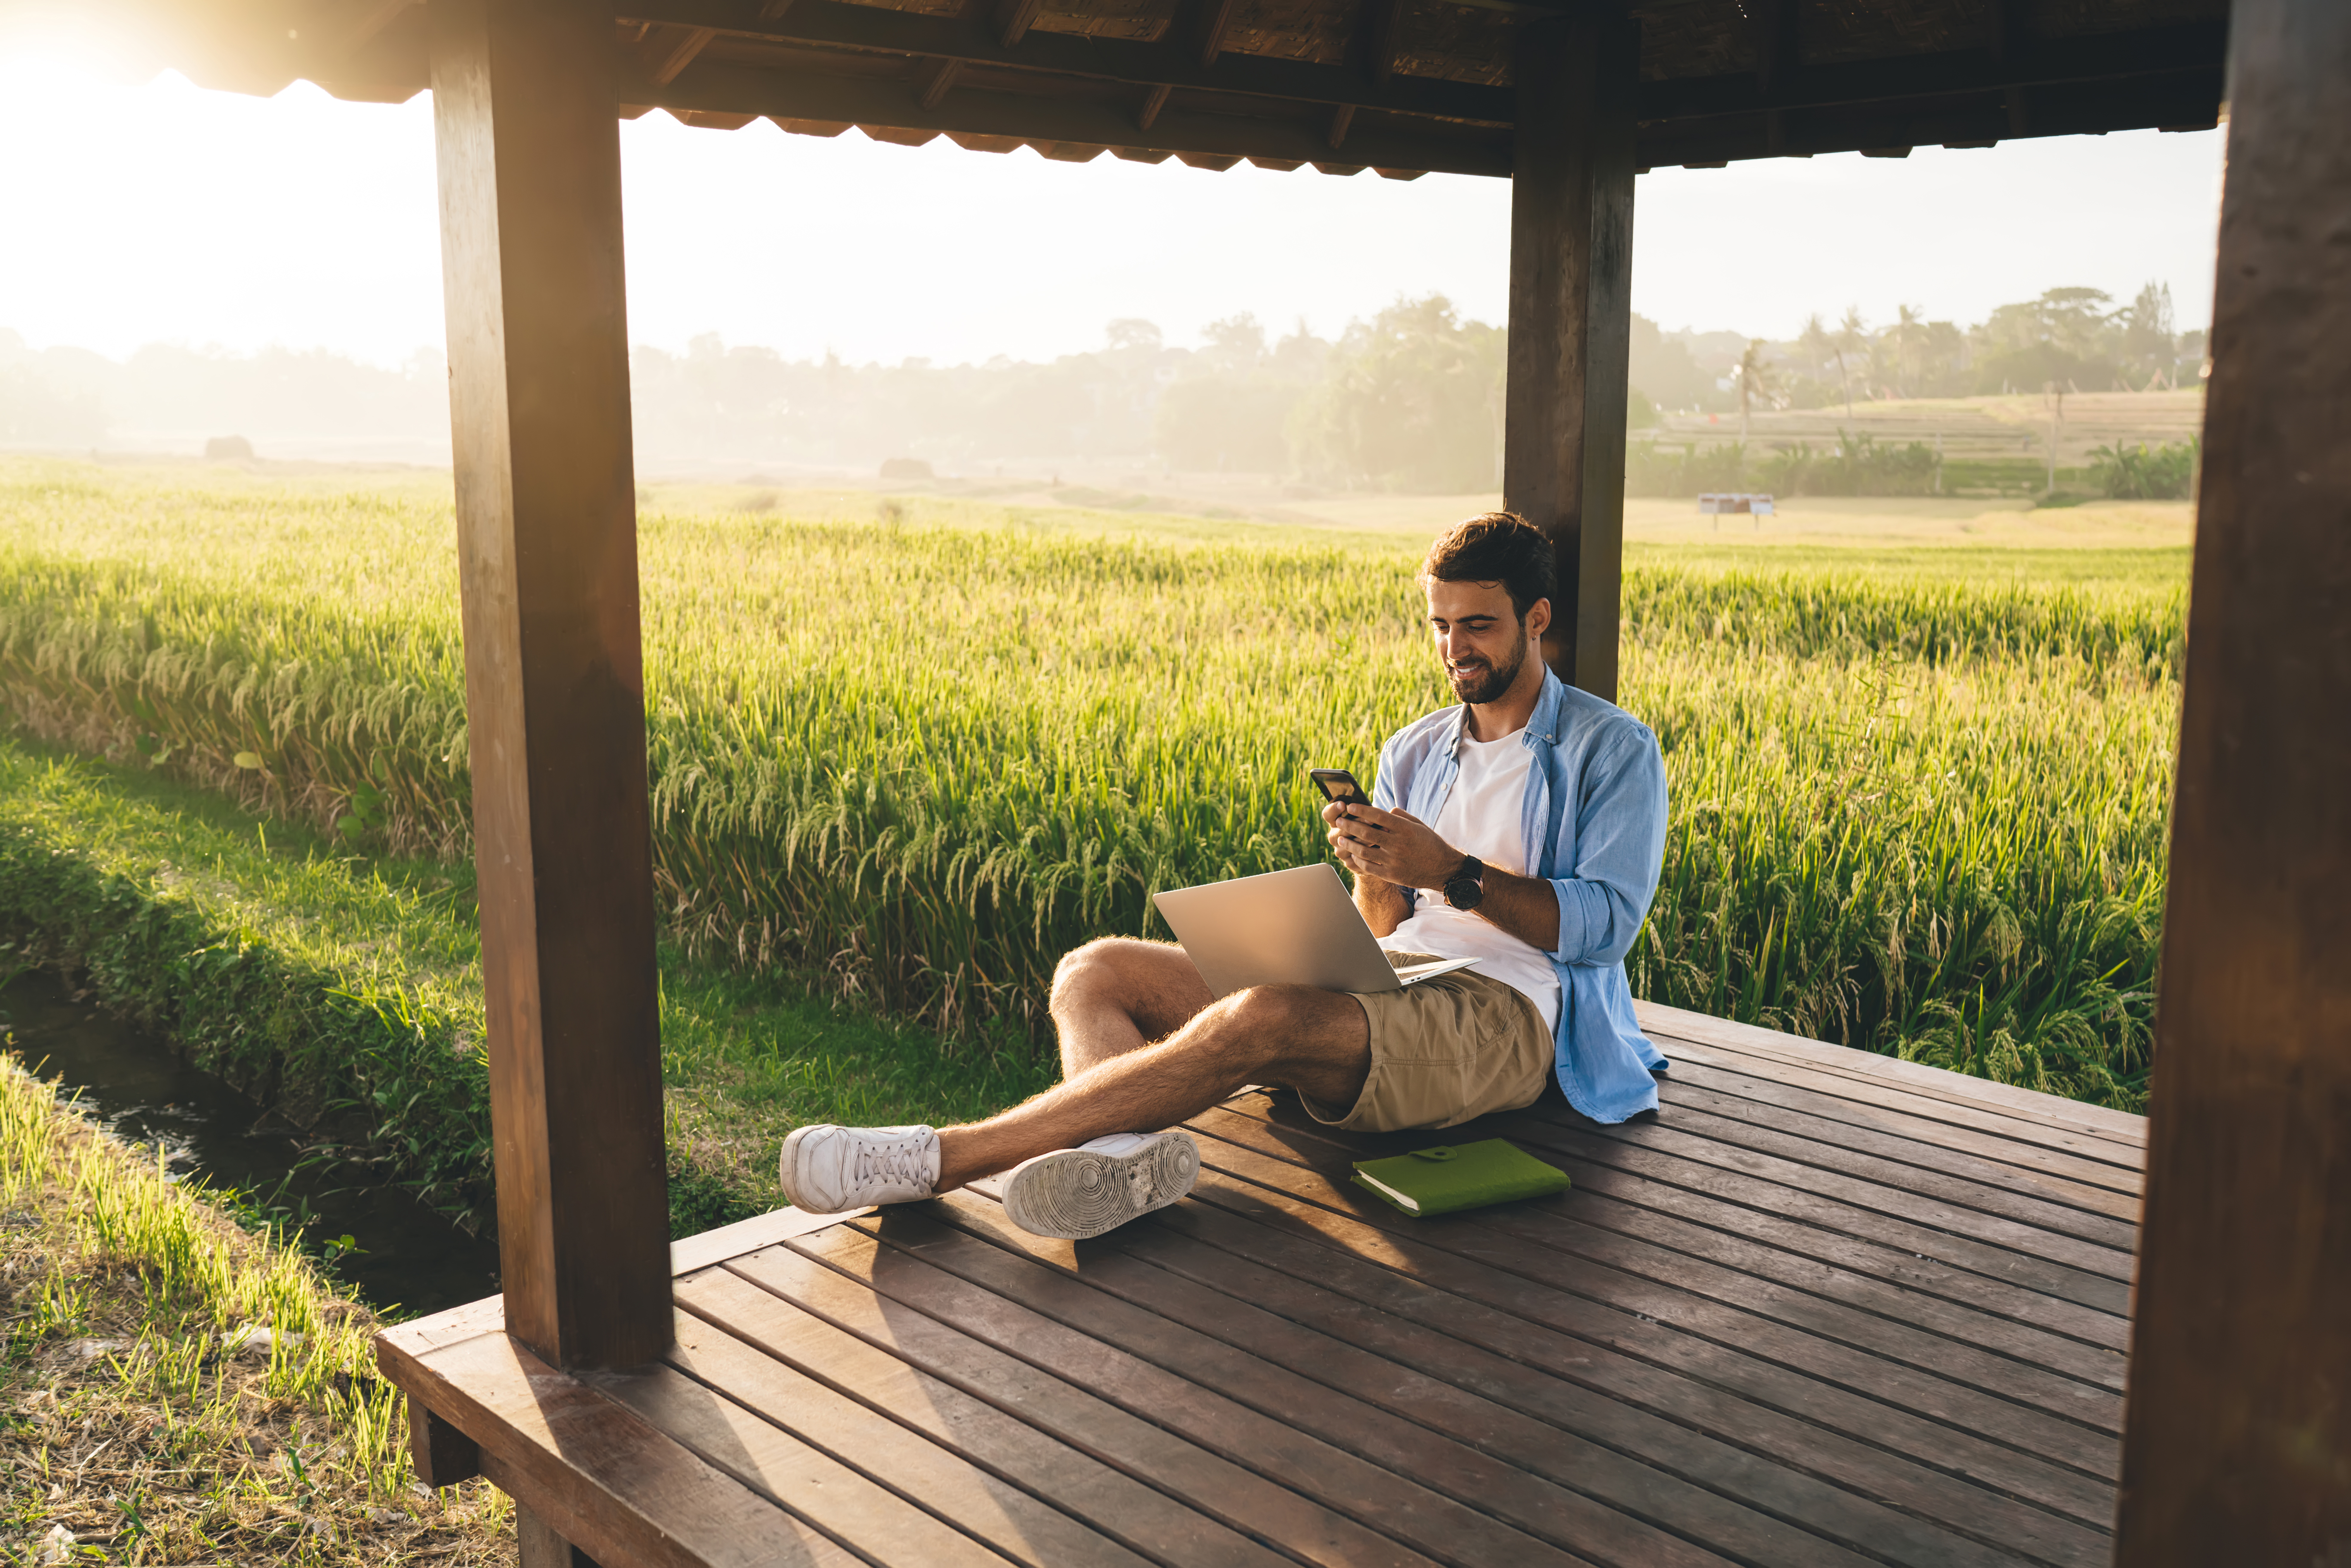 You man on his phone with laptop on lap, sitting in a wooden structure surrounded by cornfield